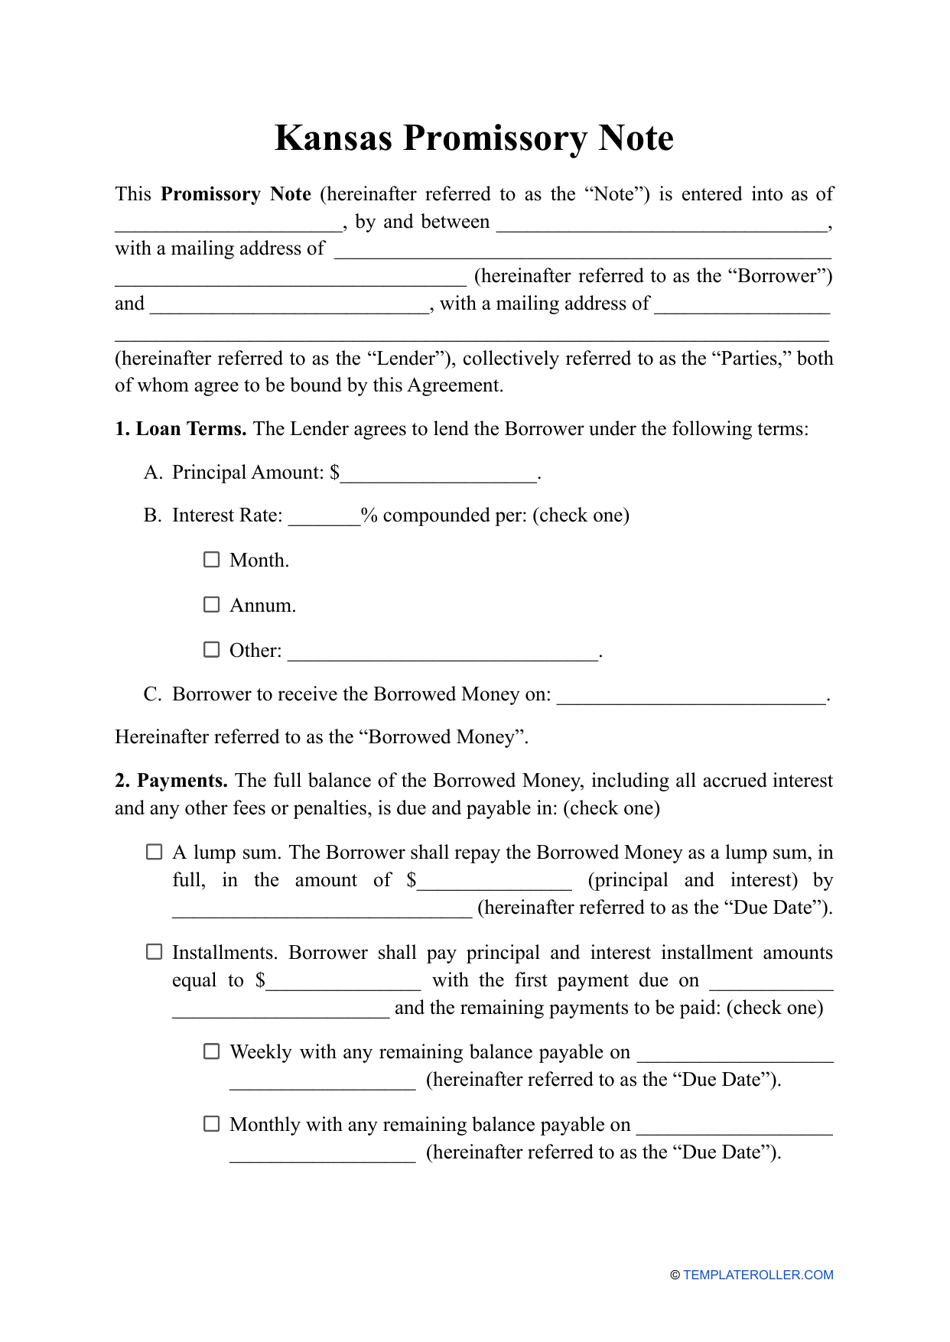 Promissory Note Template for Kansas